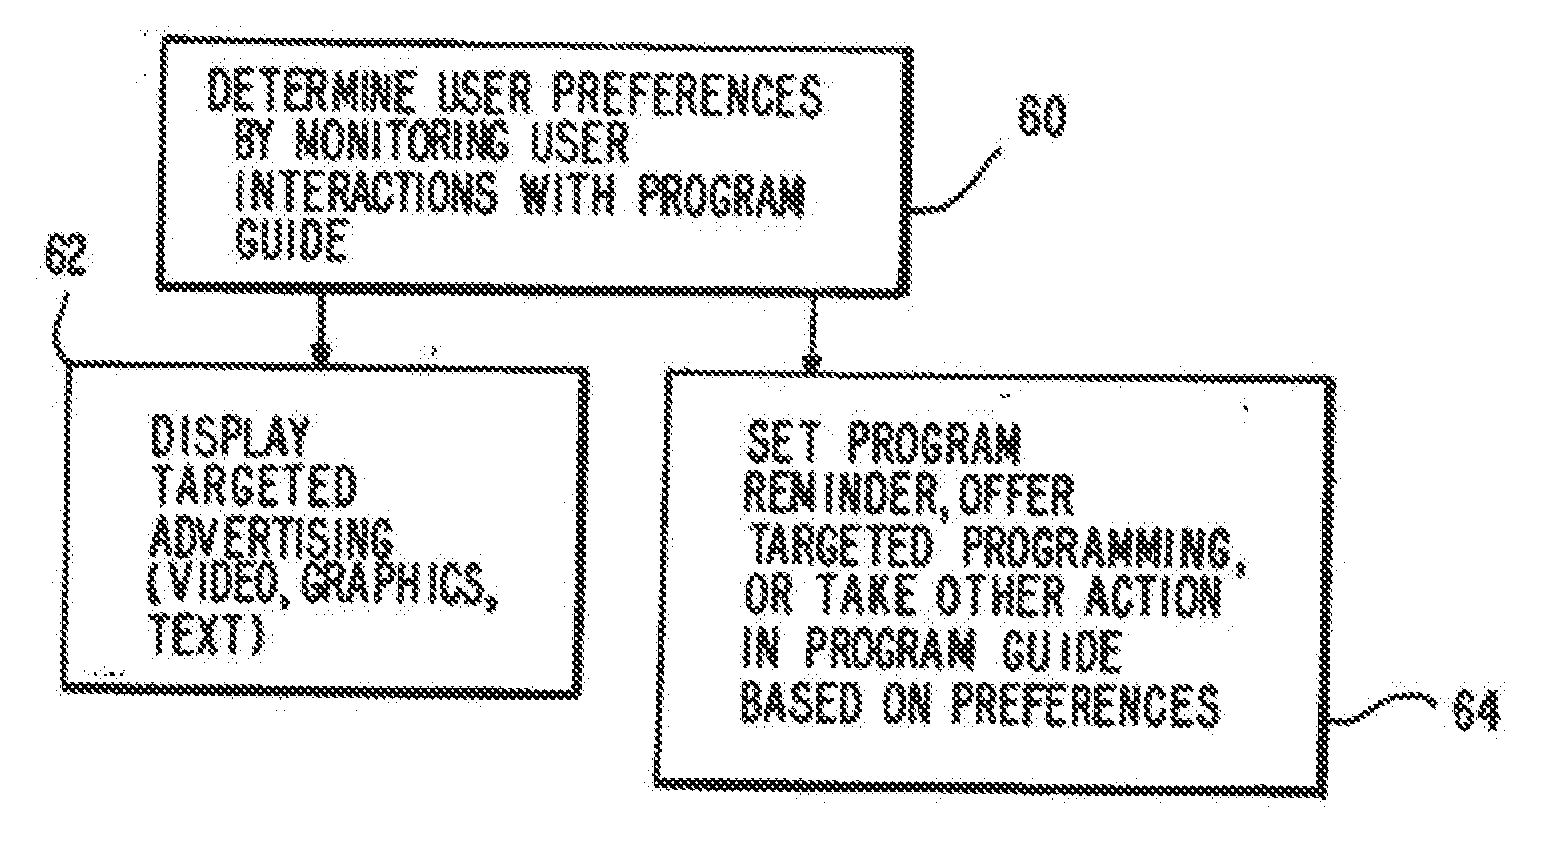 Program guide system with targeted advertising